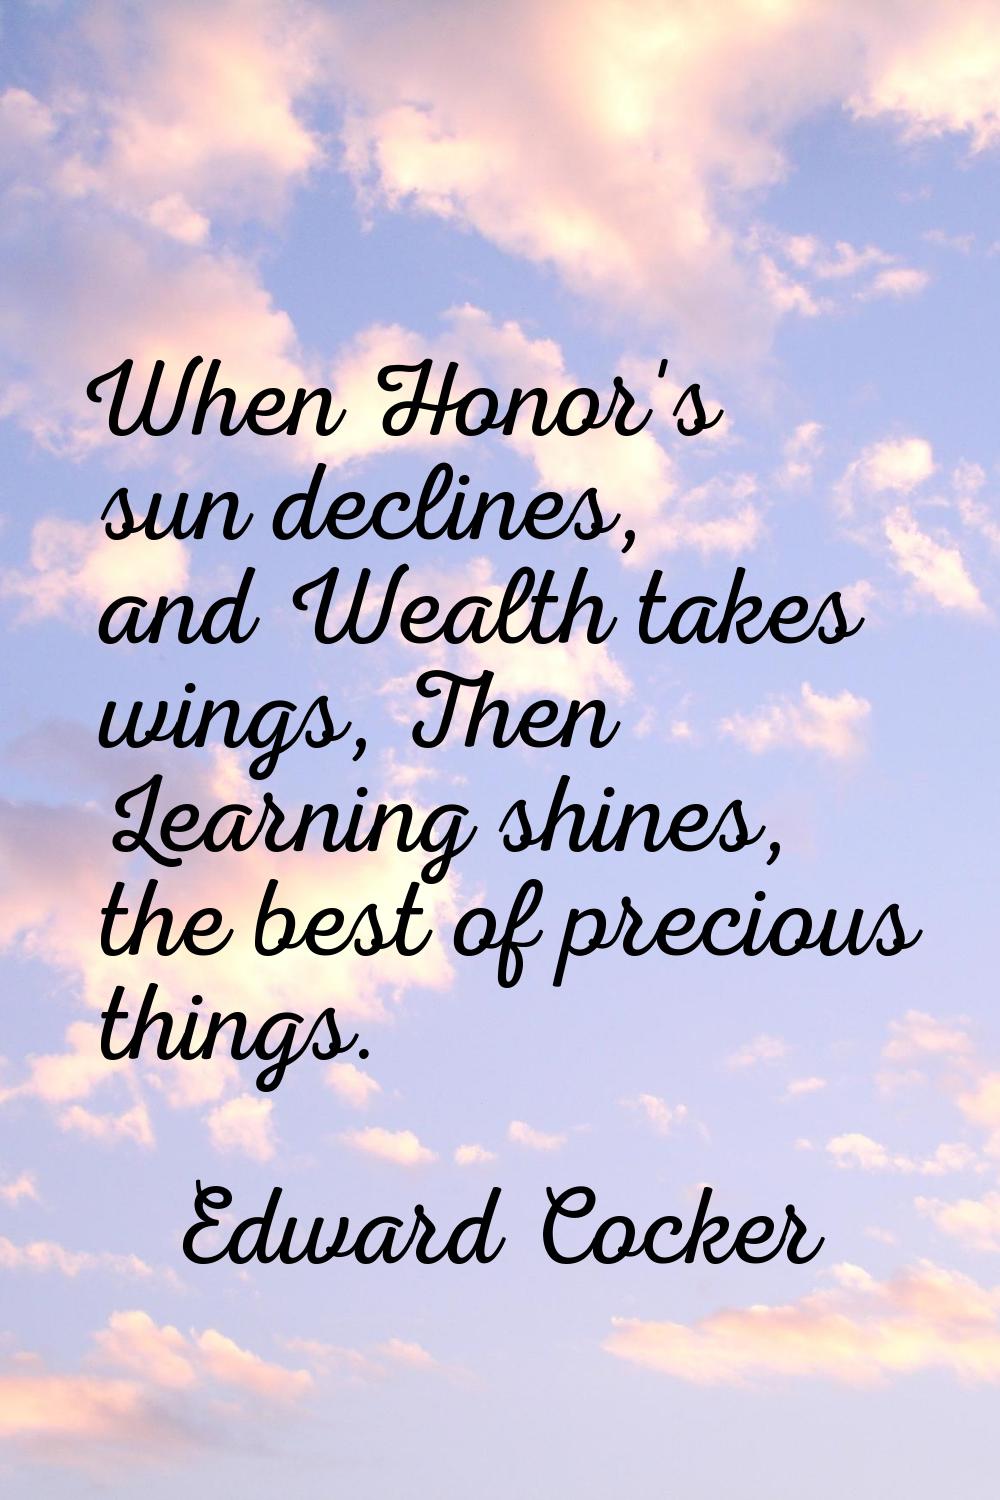 When Honor's sun declines, and Wealth takes wings, Then Learning shines, the best of precious thing